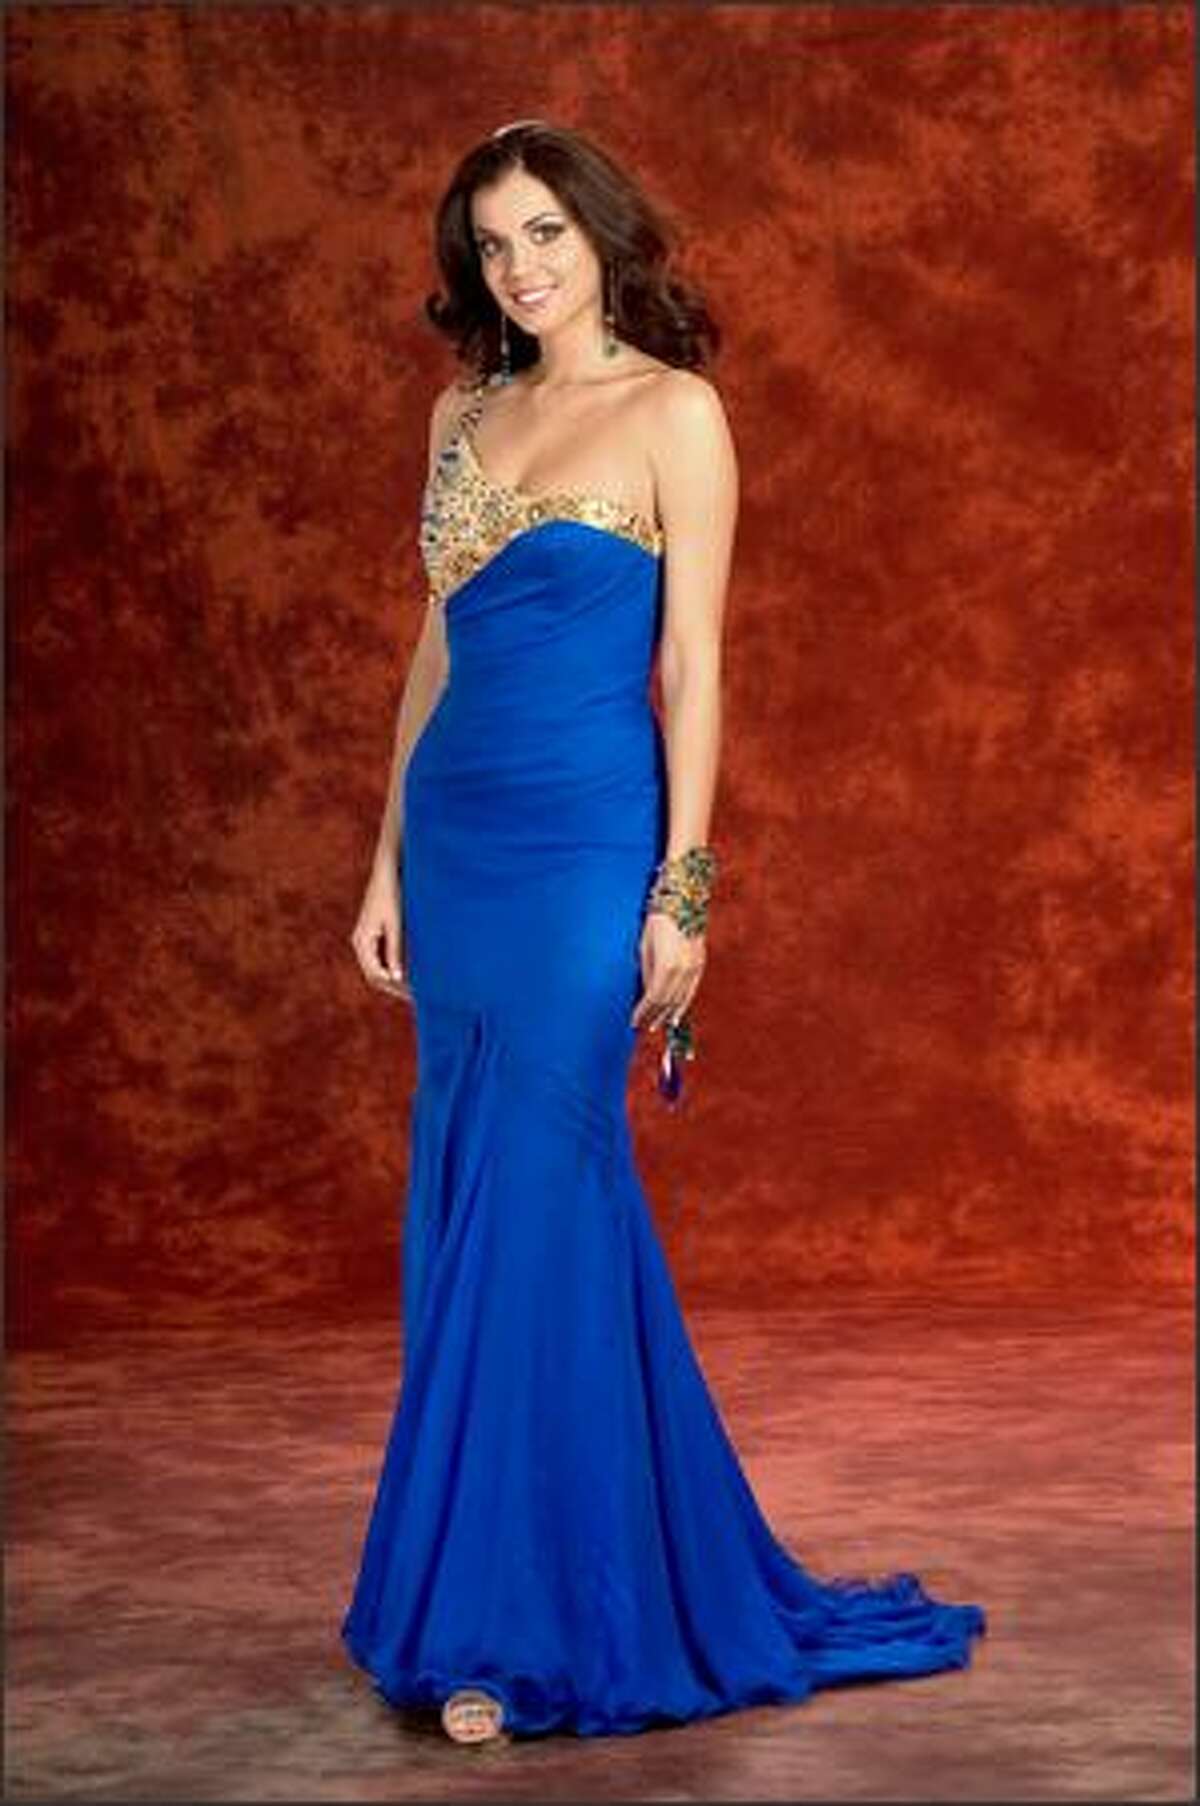 Michelle Marie Font, Miss Washington USA 2008, poses in her evening gown during registrations and fittings for the Miss USA competition in Las Vegas on March 27. She will compete for the title of Miss USA 2008 during the NBC broadcast Friday night.